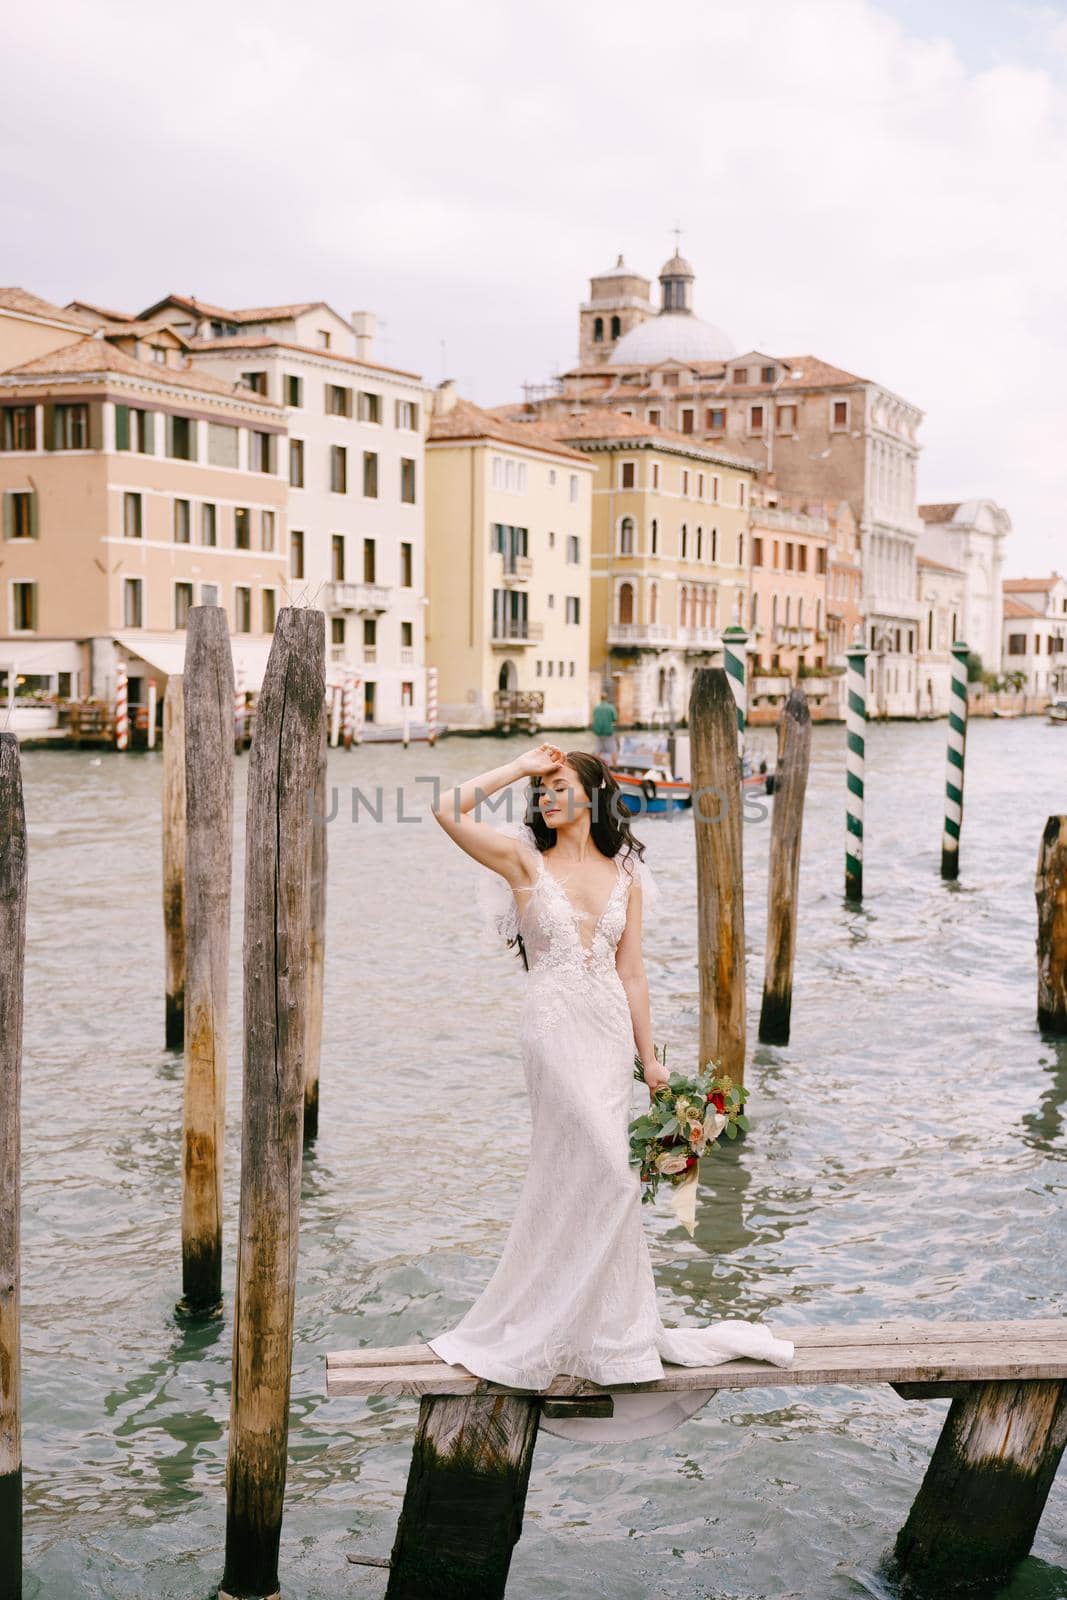 The bride stand on a wooden dock for boats and gondolas, near striped green and white mooring poles, against the facades of the Grand Canal buildings.